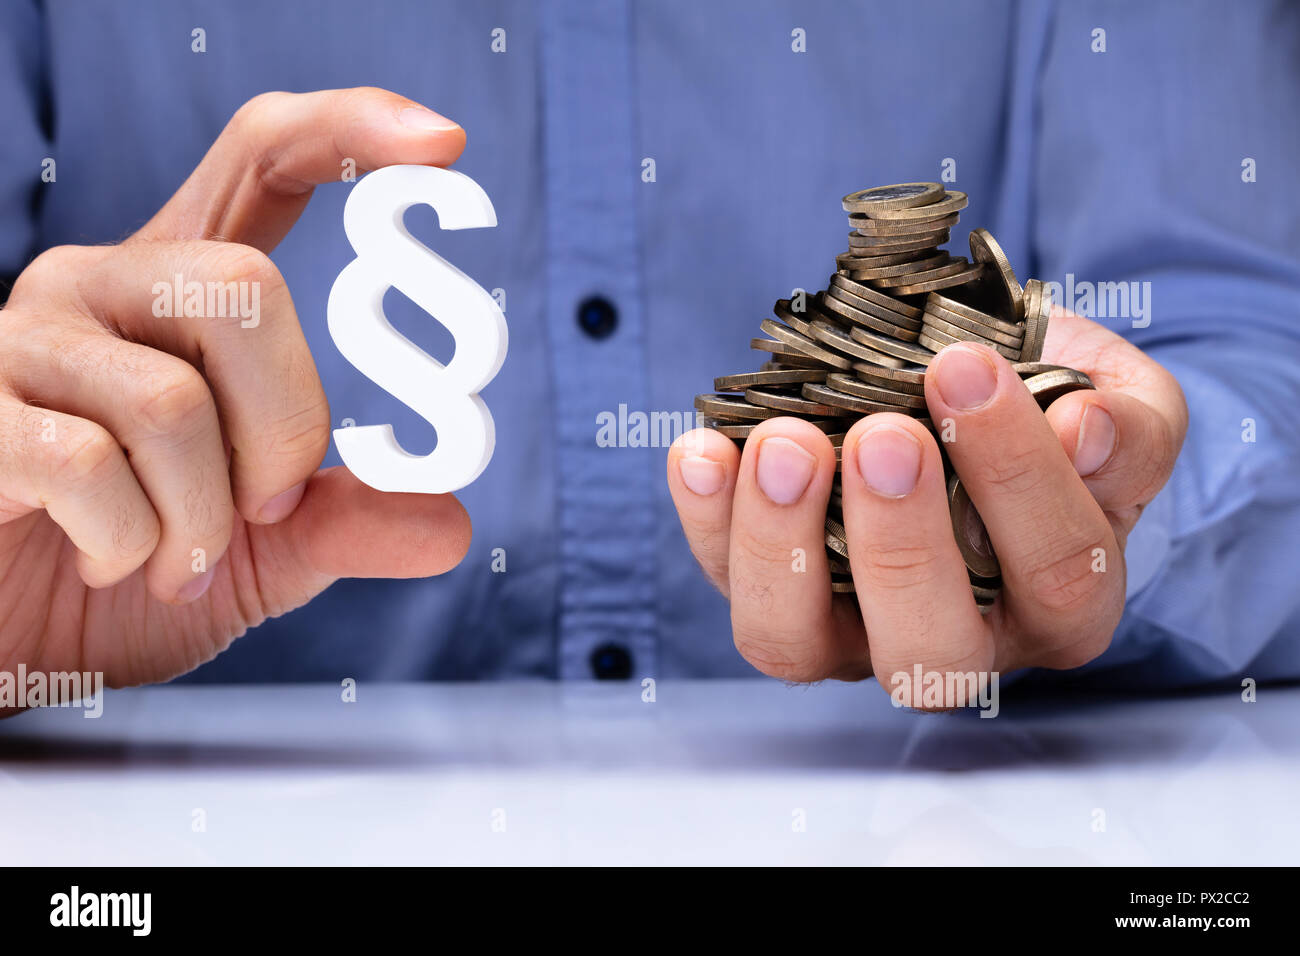 Close-up Of A Person's Hand Holding White Paragraph Symbol And Coins Stock Photo